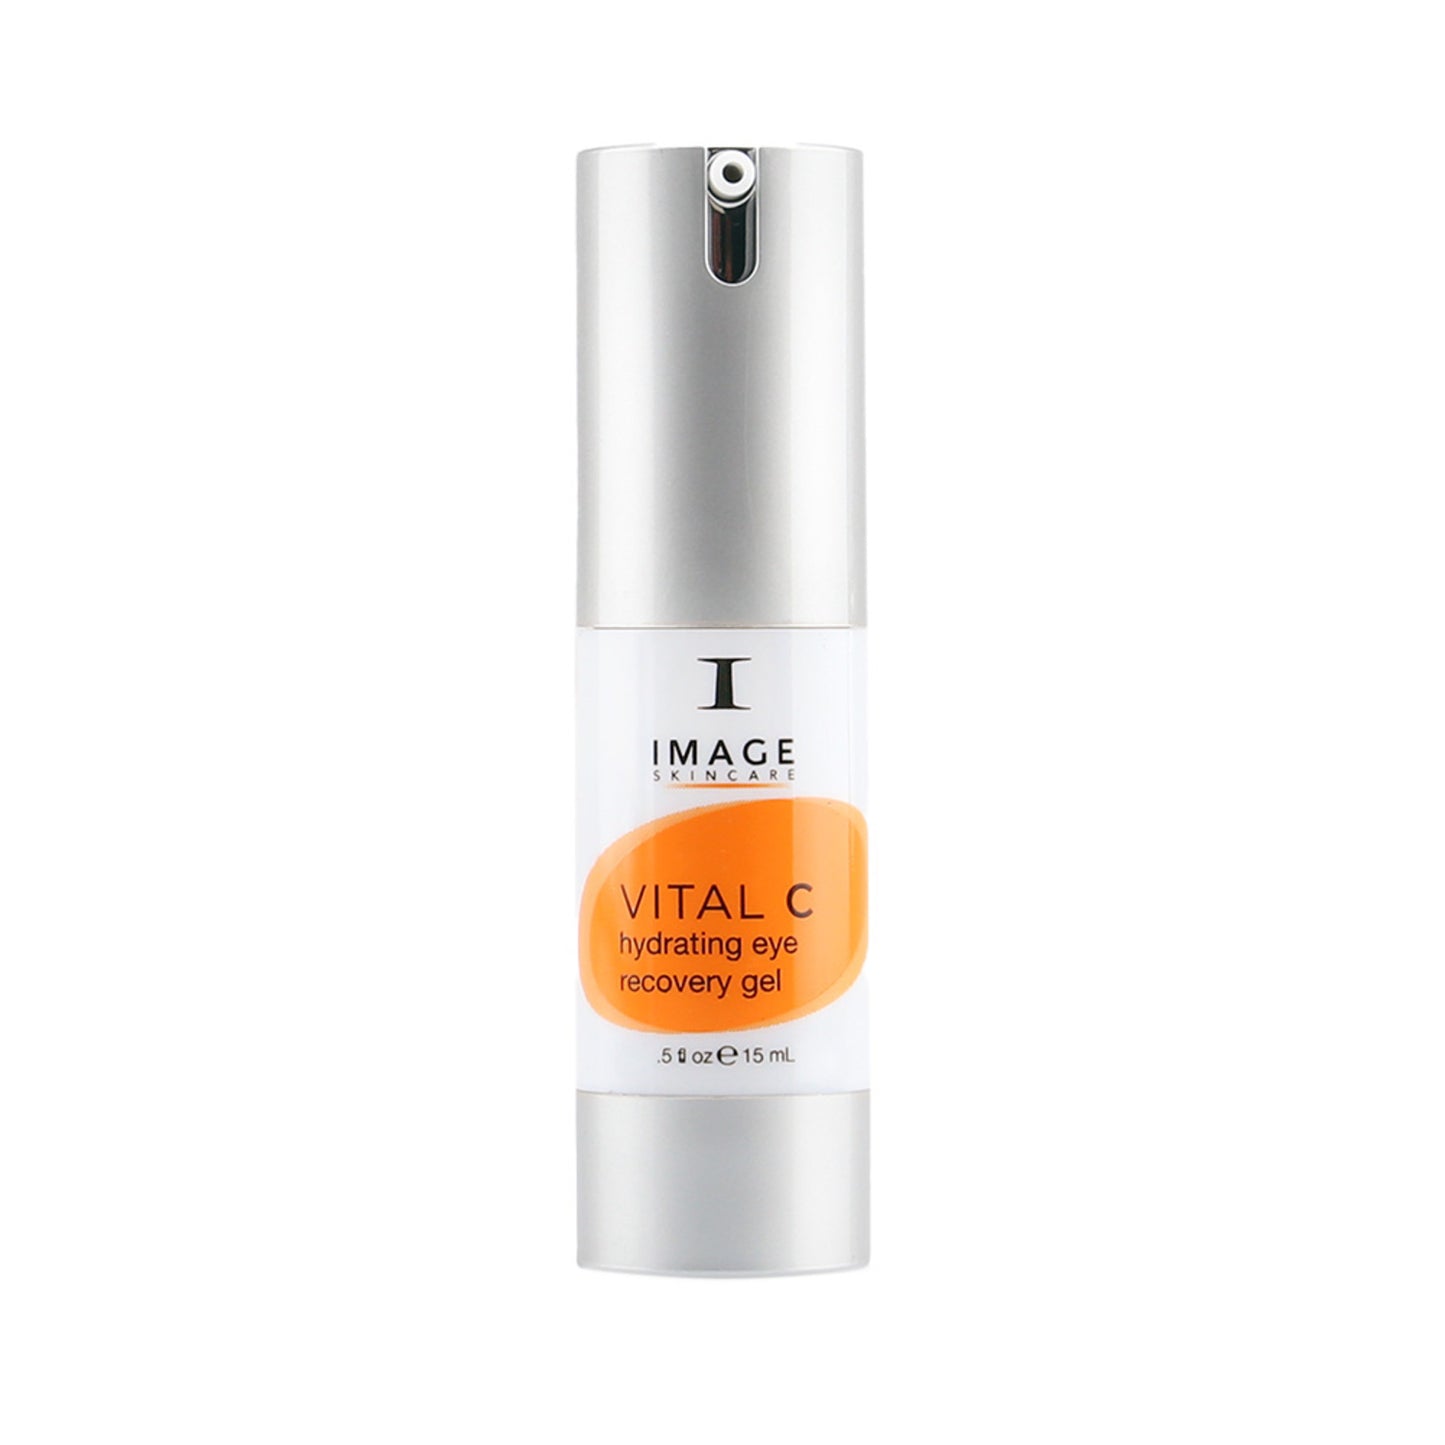 Image Skincare Vital C Hydrating Eye Recovery Gel with SCT